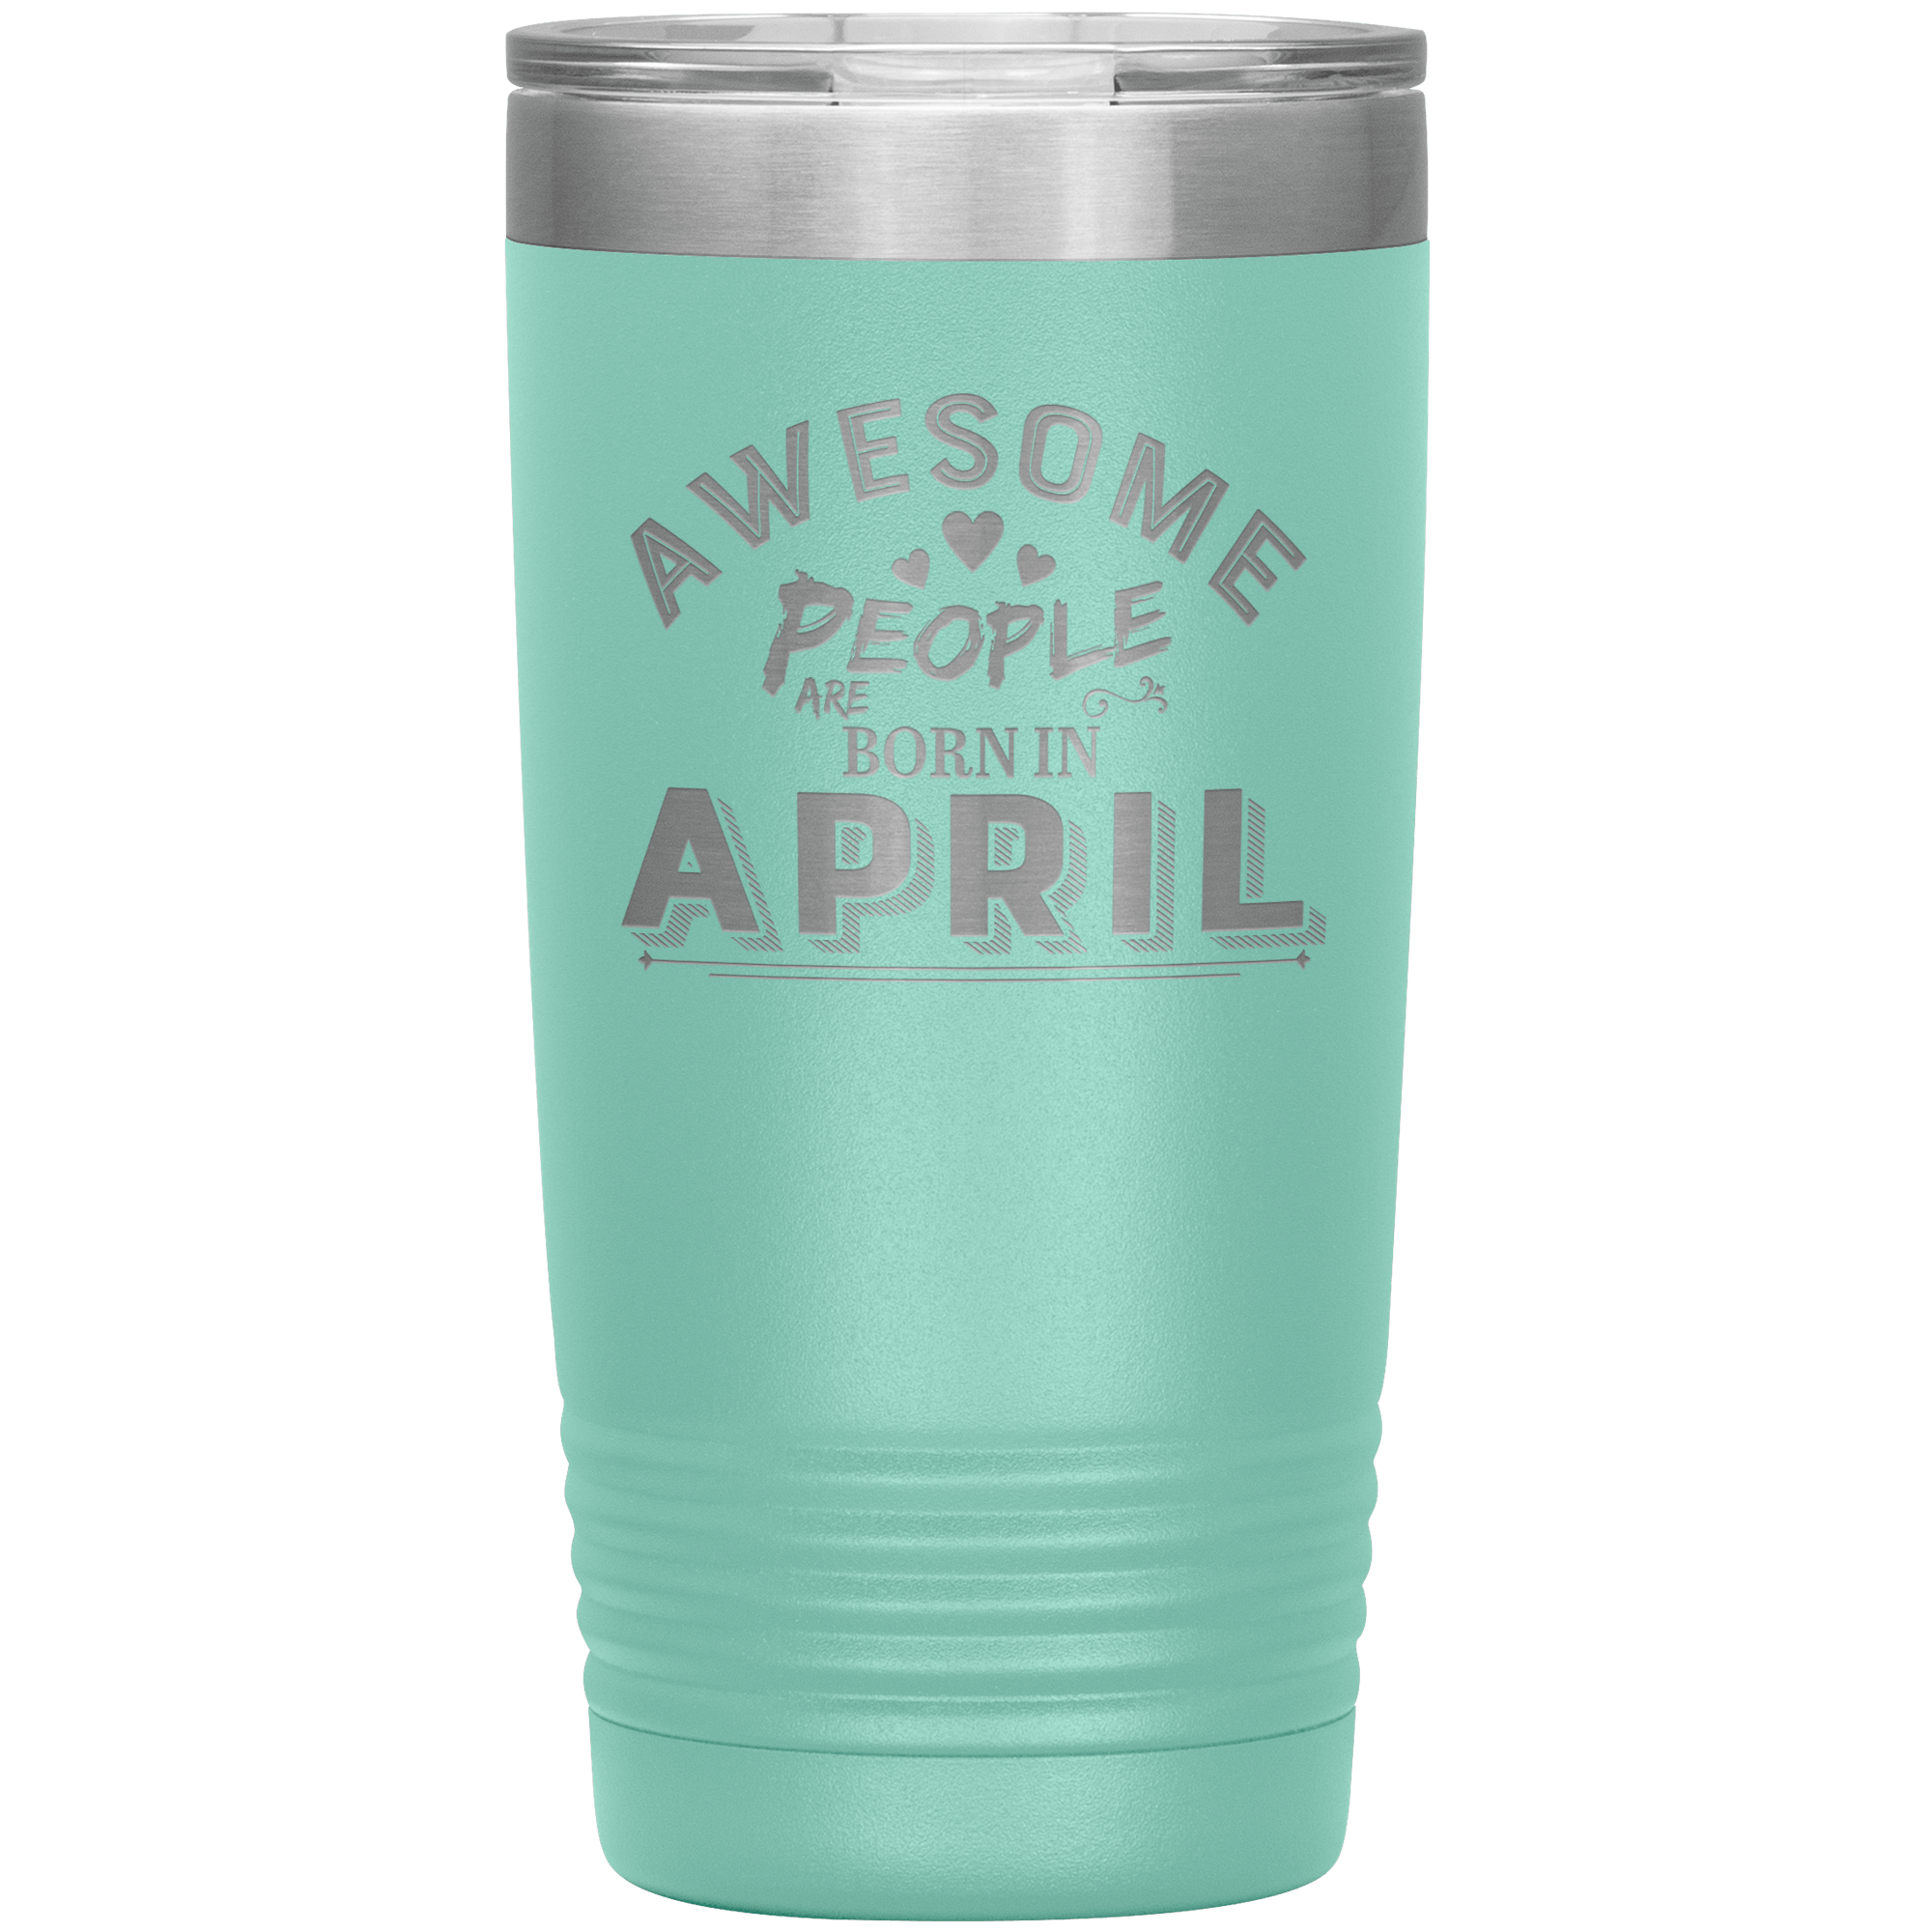 "AWESOME PEOPLE ARE BORN IN APRIL" Tumbler